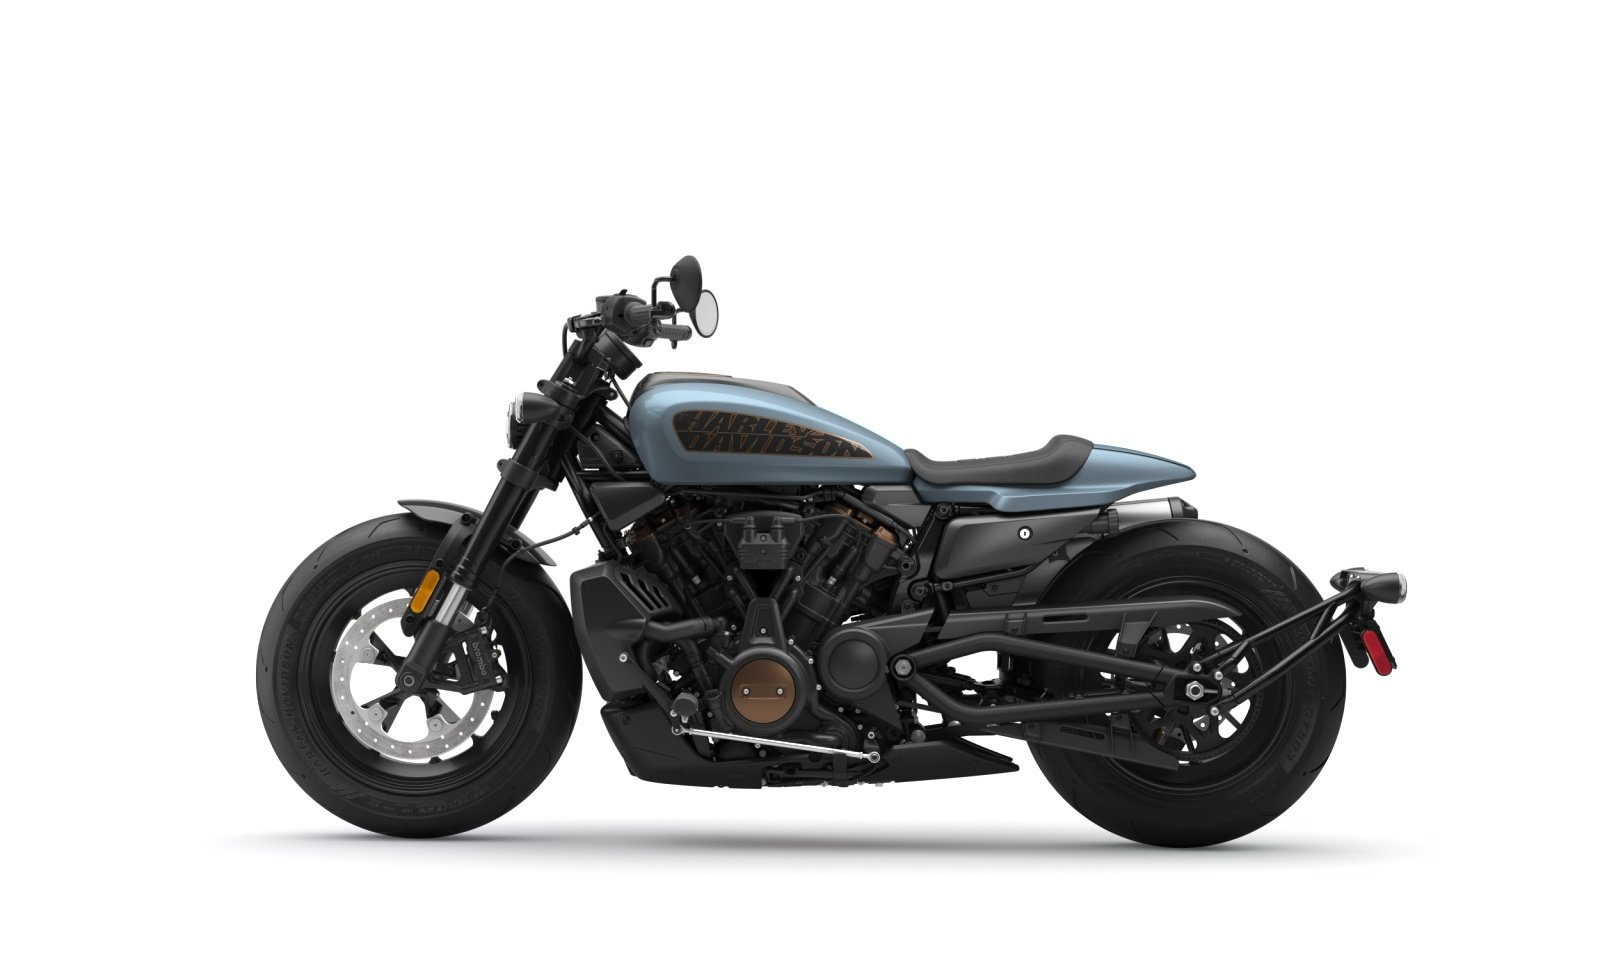 2021 Harley-Davidson Sportster S, First Look Review